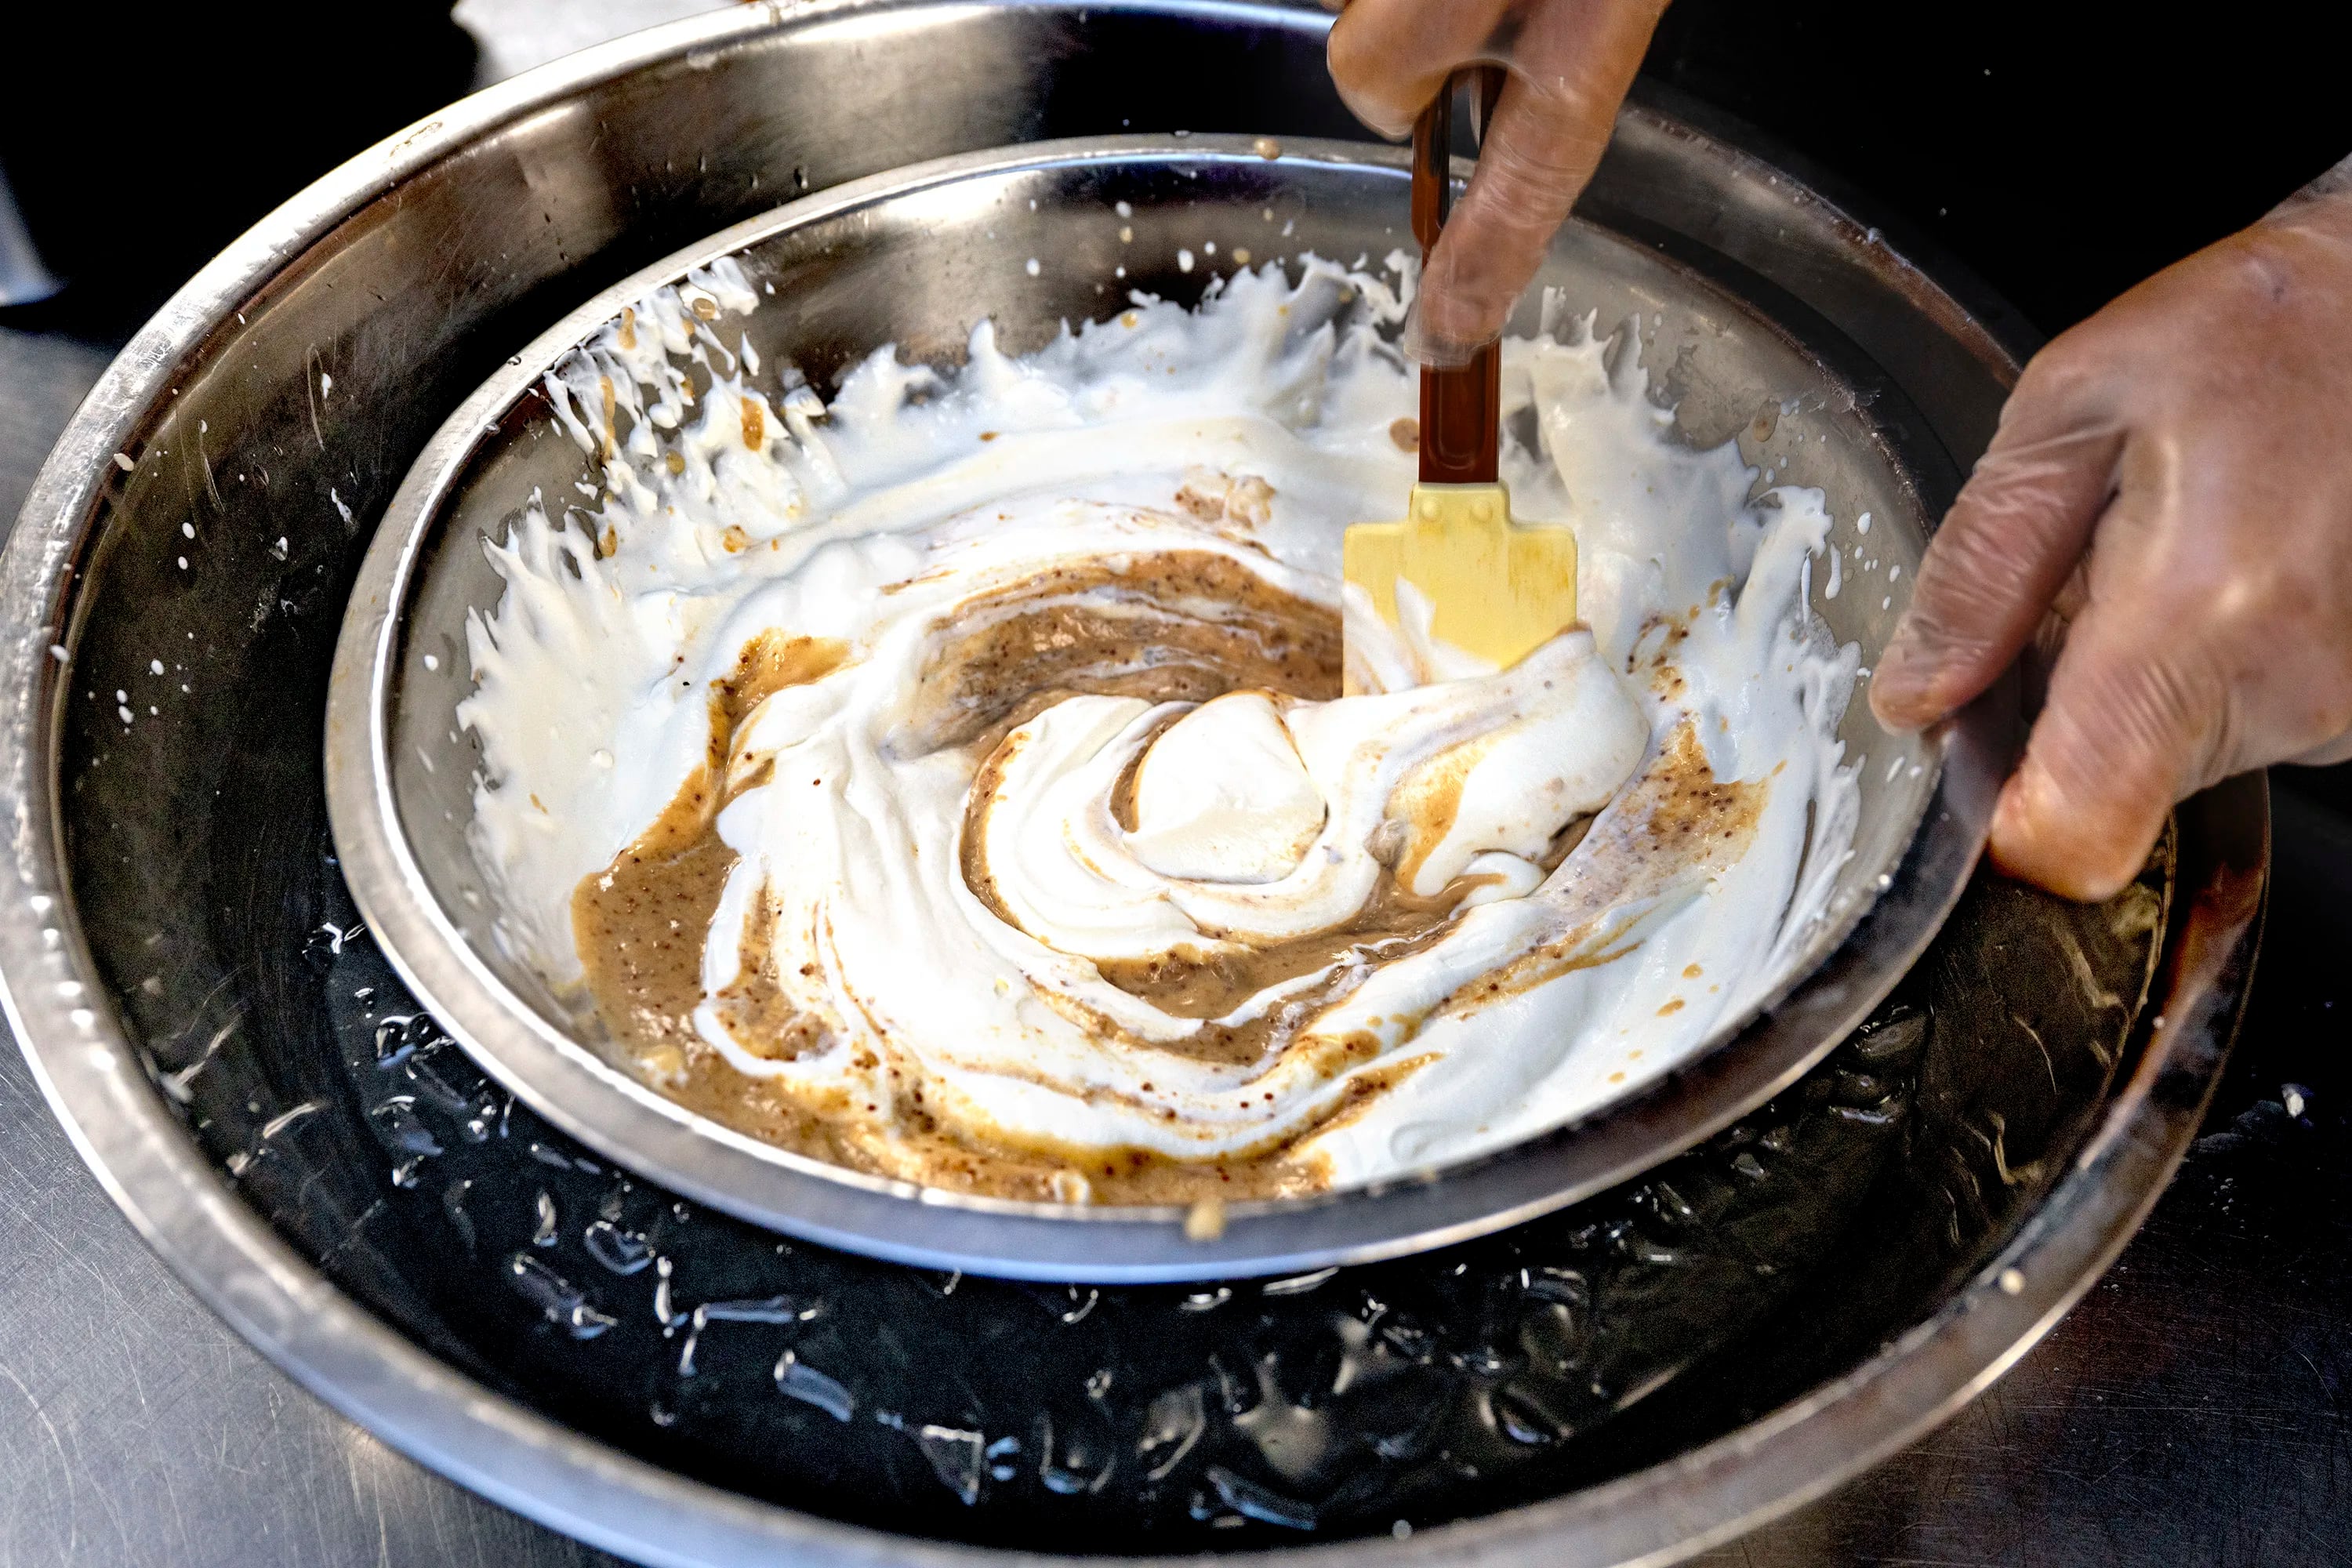 Rakesh Ramola stirs the fig mixture into pan with whipped cream as he makes anjeer (fig) kulfi at his Indeblue restaurant in Cherry Hill.